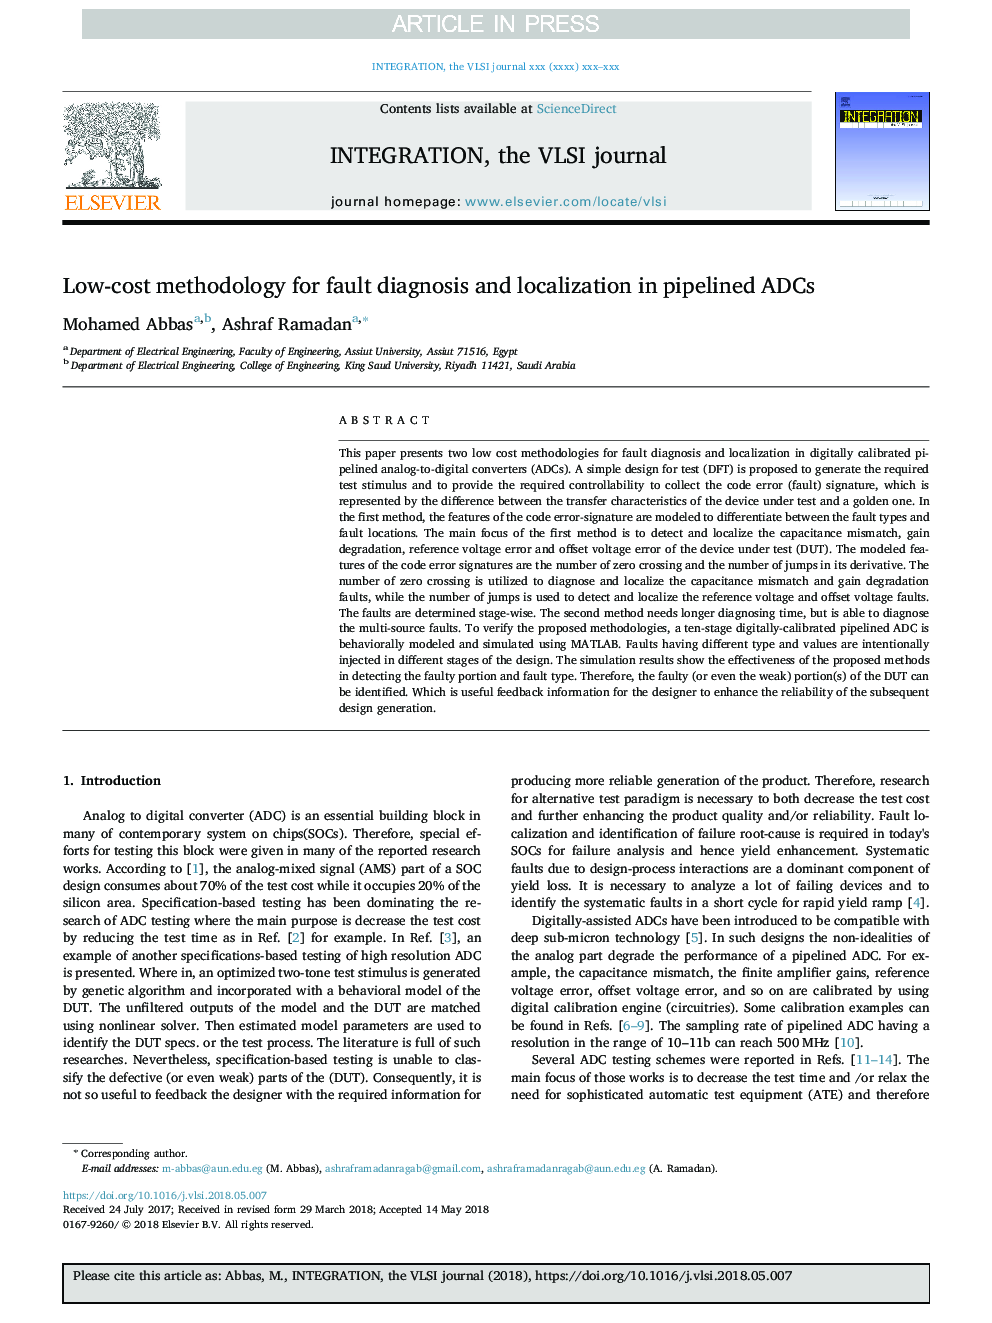 Low-cost methodology for fault diagnosis and localization in pipelined ADCs